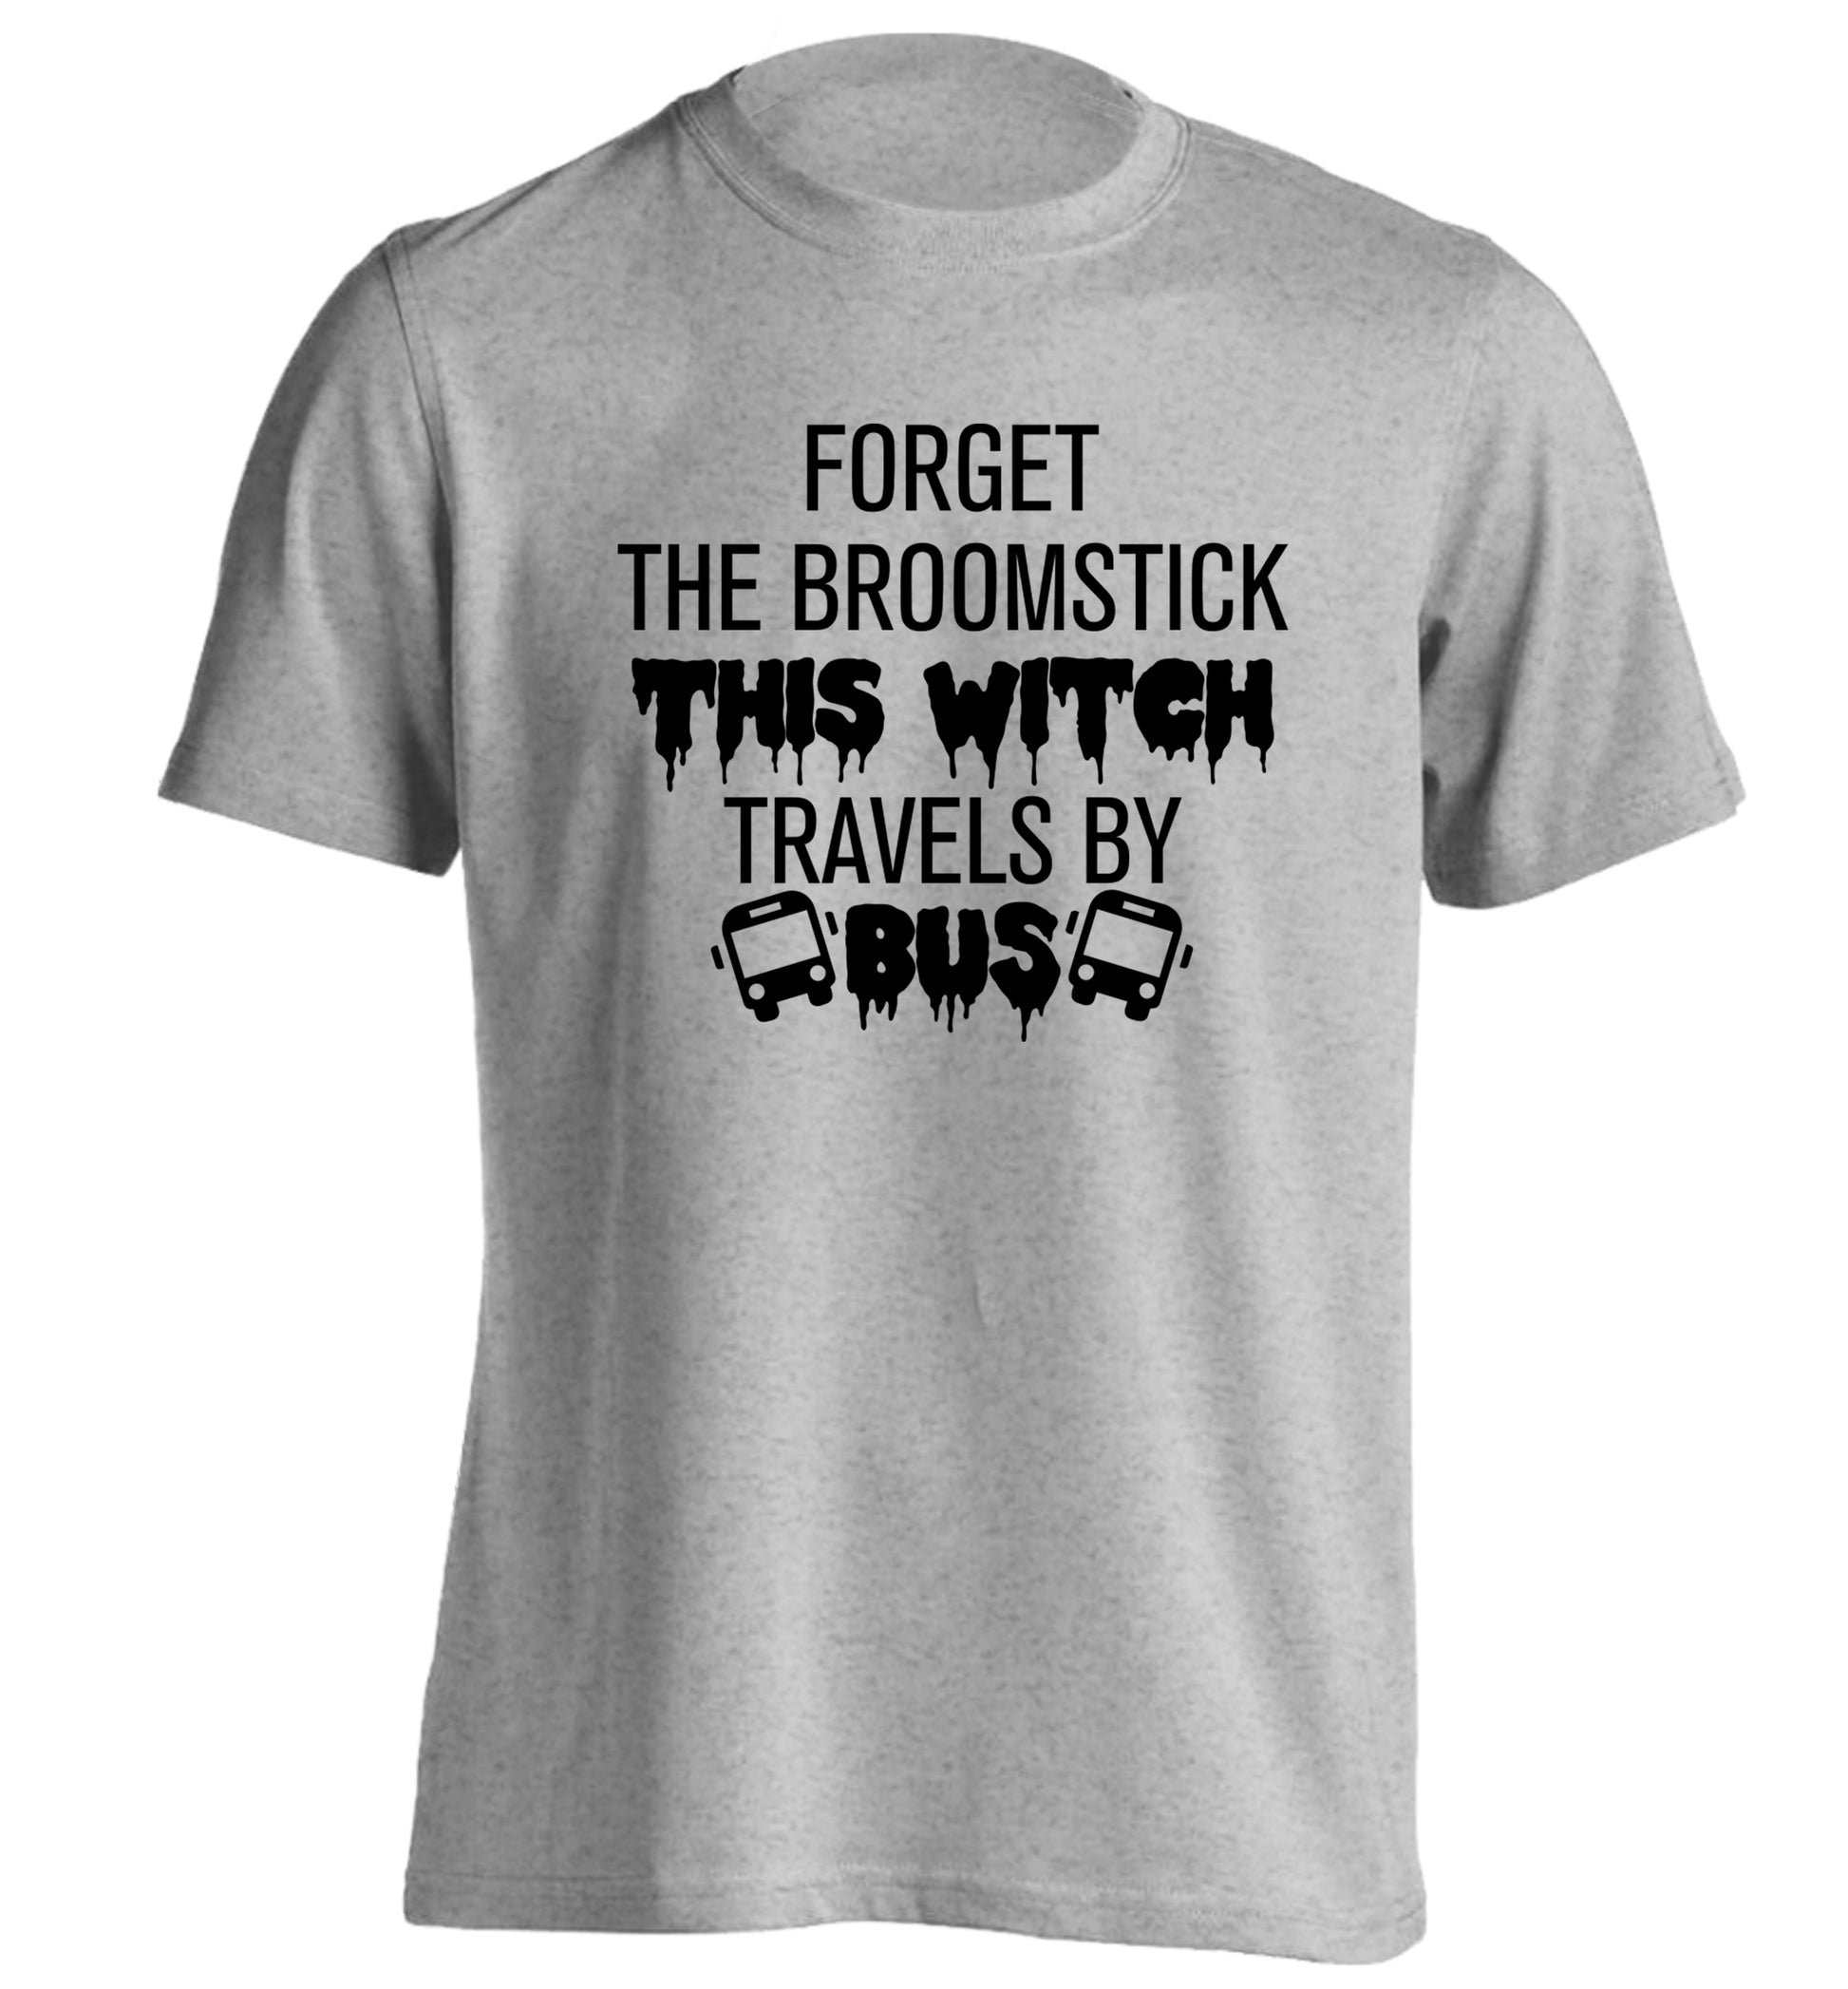 Forget the broomstick this witch travels by bus adults unisexgrey Tshirt 2XL